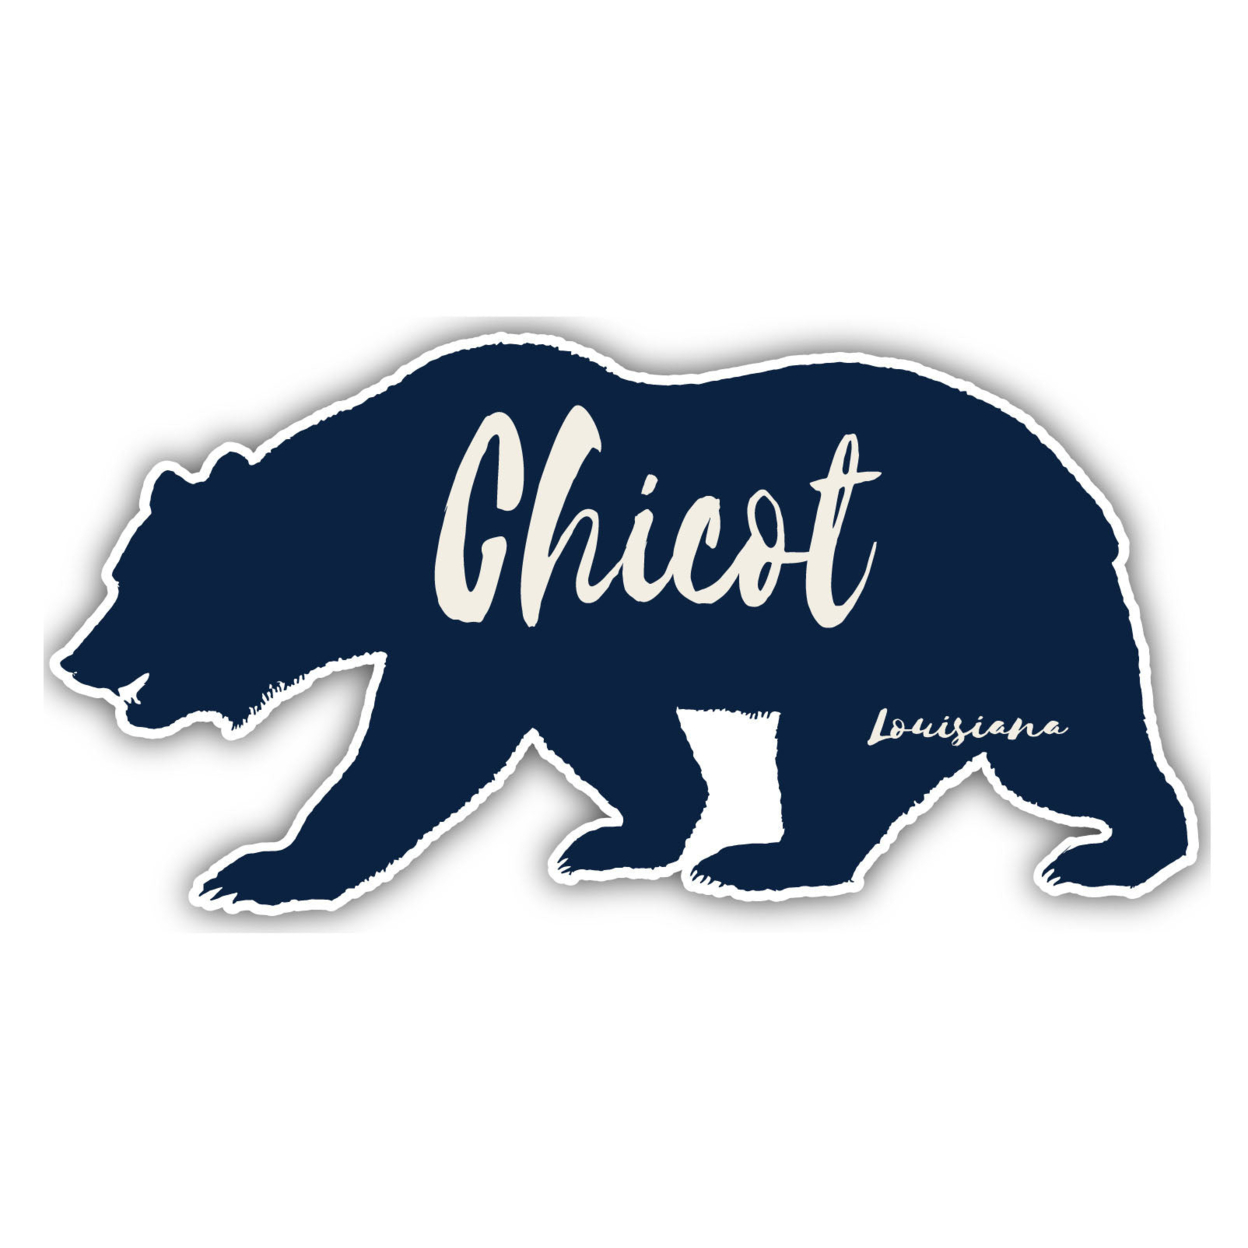 Chicot Louisiana Souvenir Decorative Stickers (Choose Theme And Size) - 4-Pack, 2-Inch, Bear